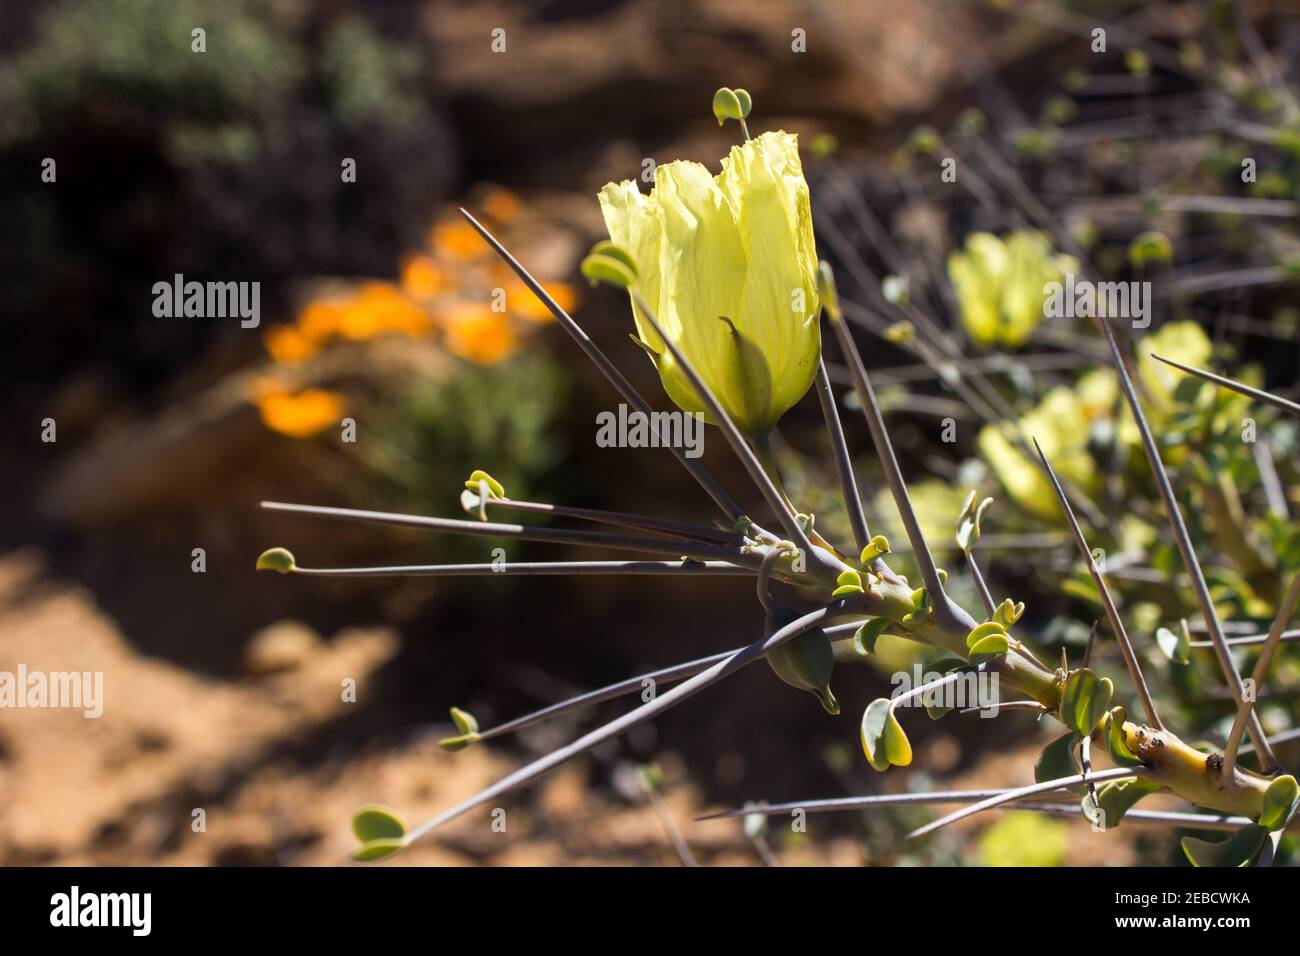 The delicate large Yellow flower of the Sarcocaulon Crassicaule, known as the Bushman's candle, surrounded by its large thorns Stock Photo